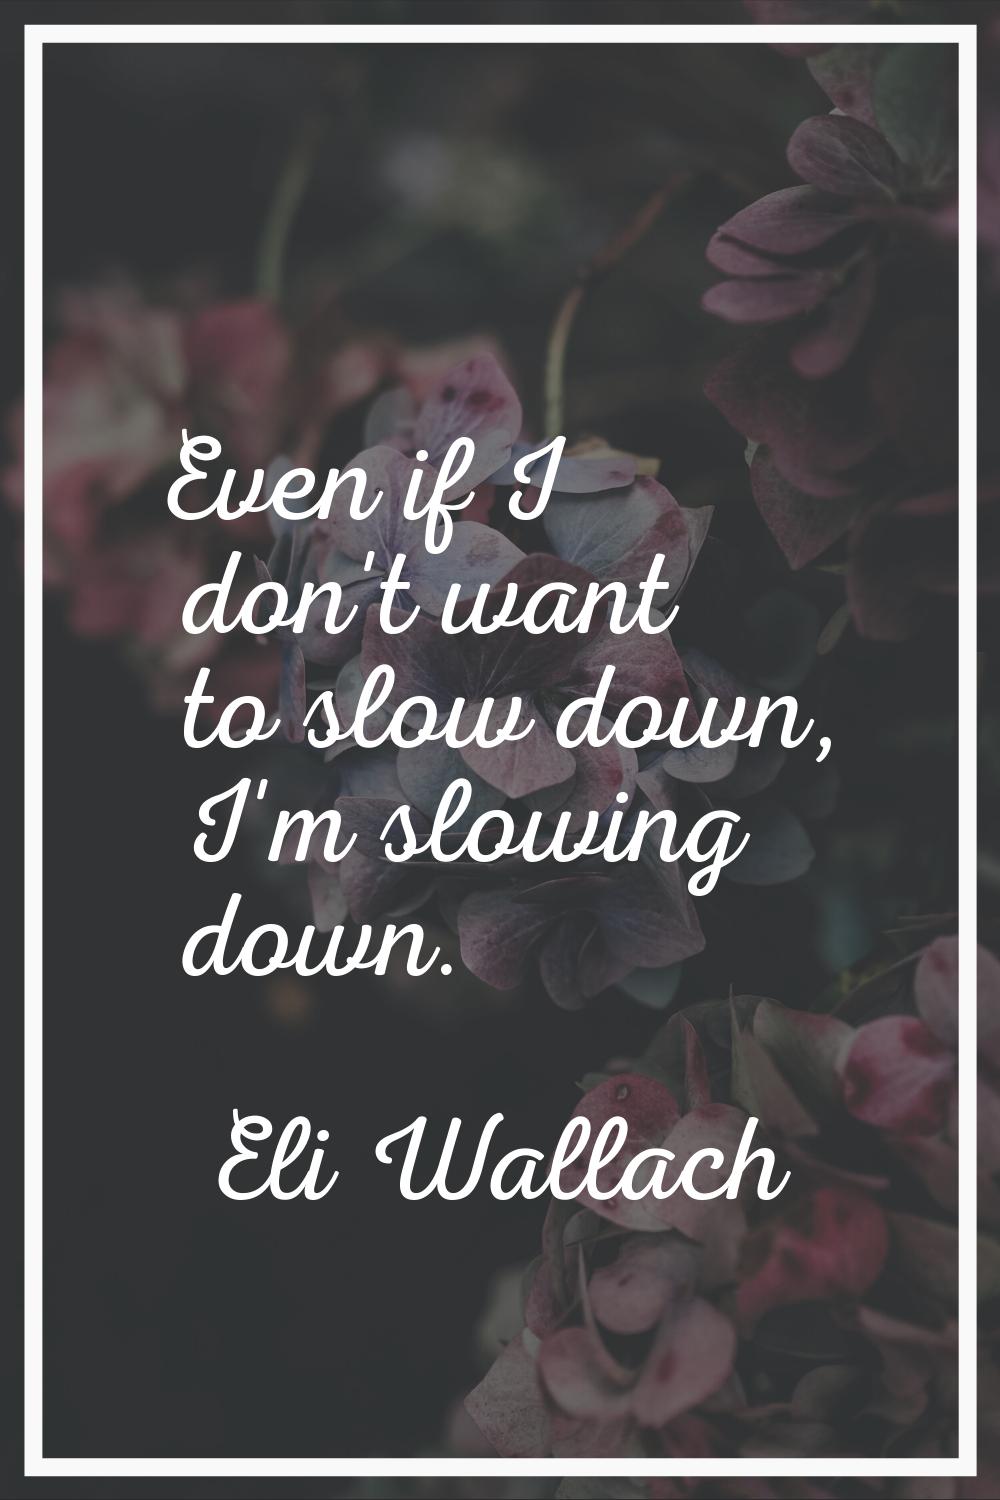 Even if I don't want to slow down, I'm slowing down.